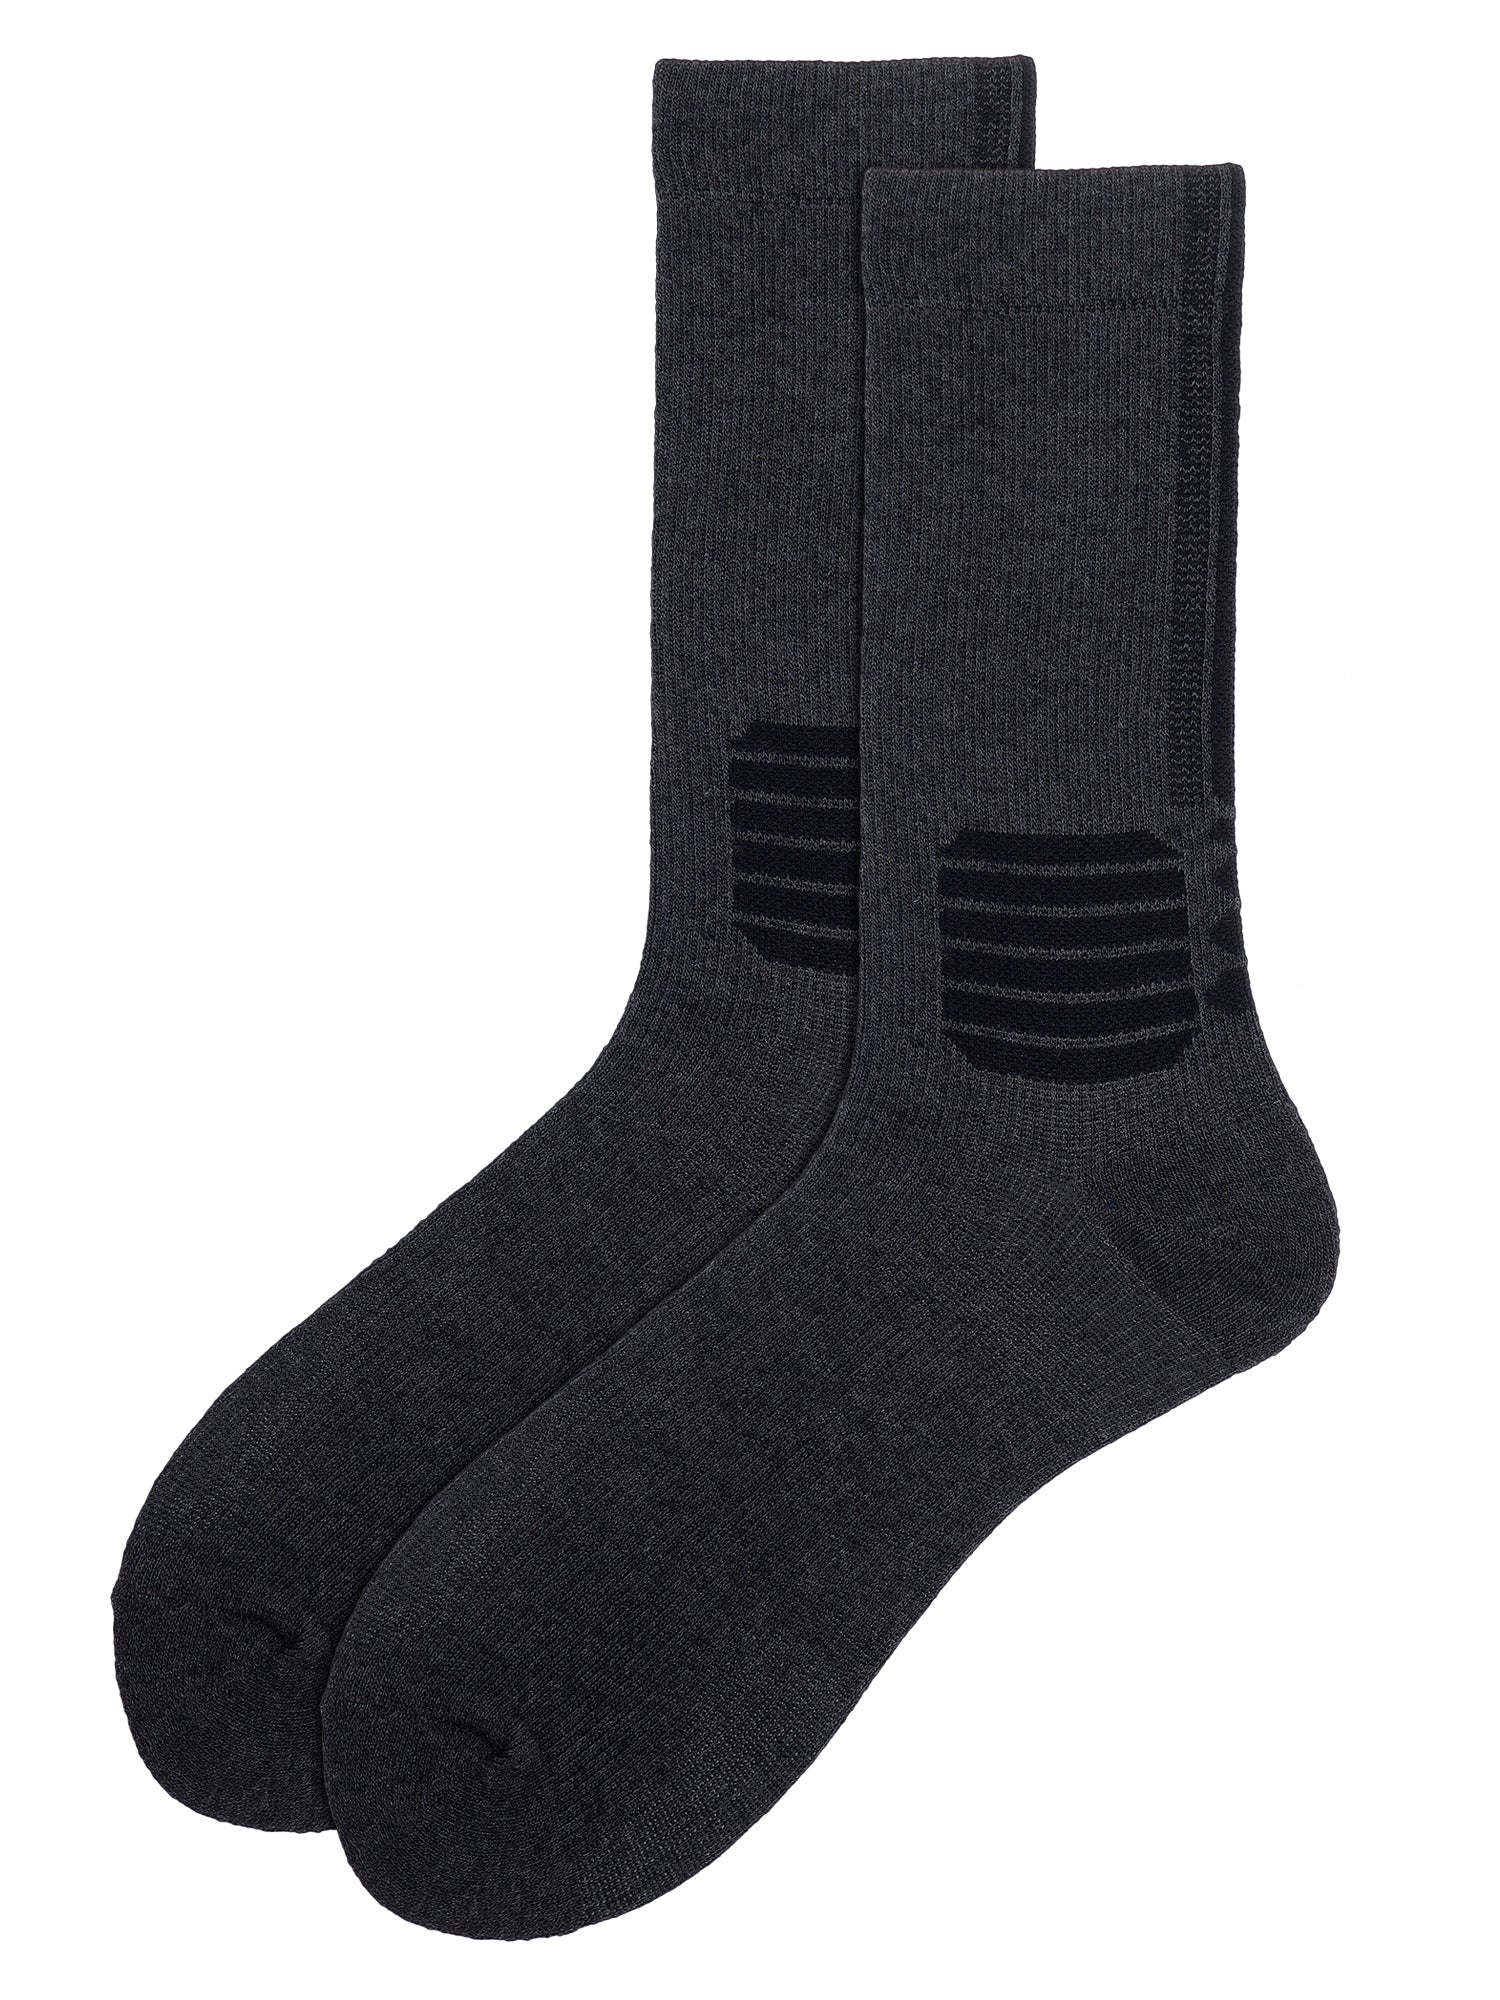 Compression Therapy | Classic Box Of 4 Pairs | Travel Socks